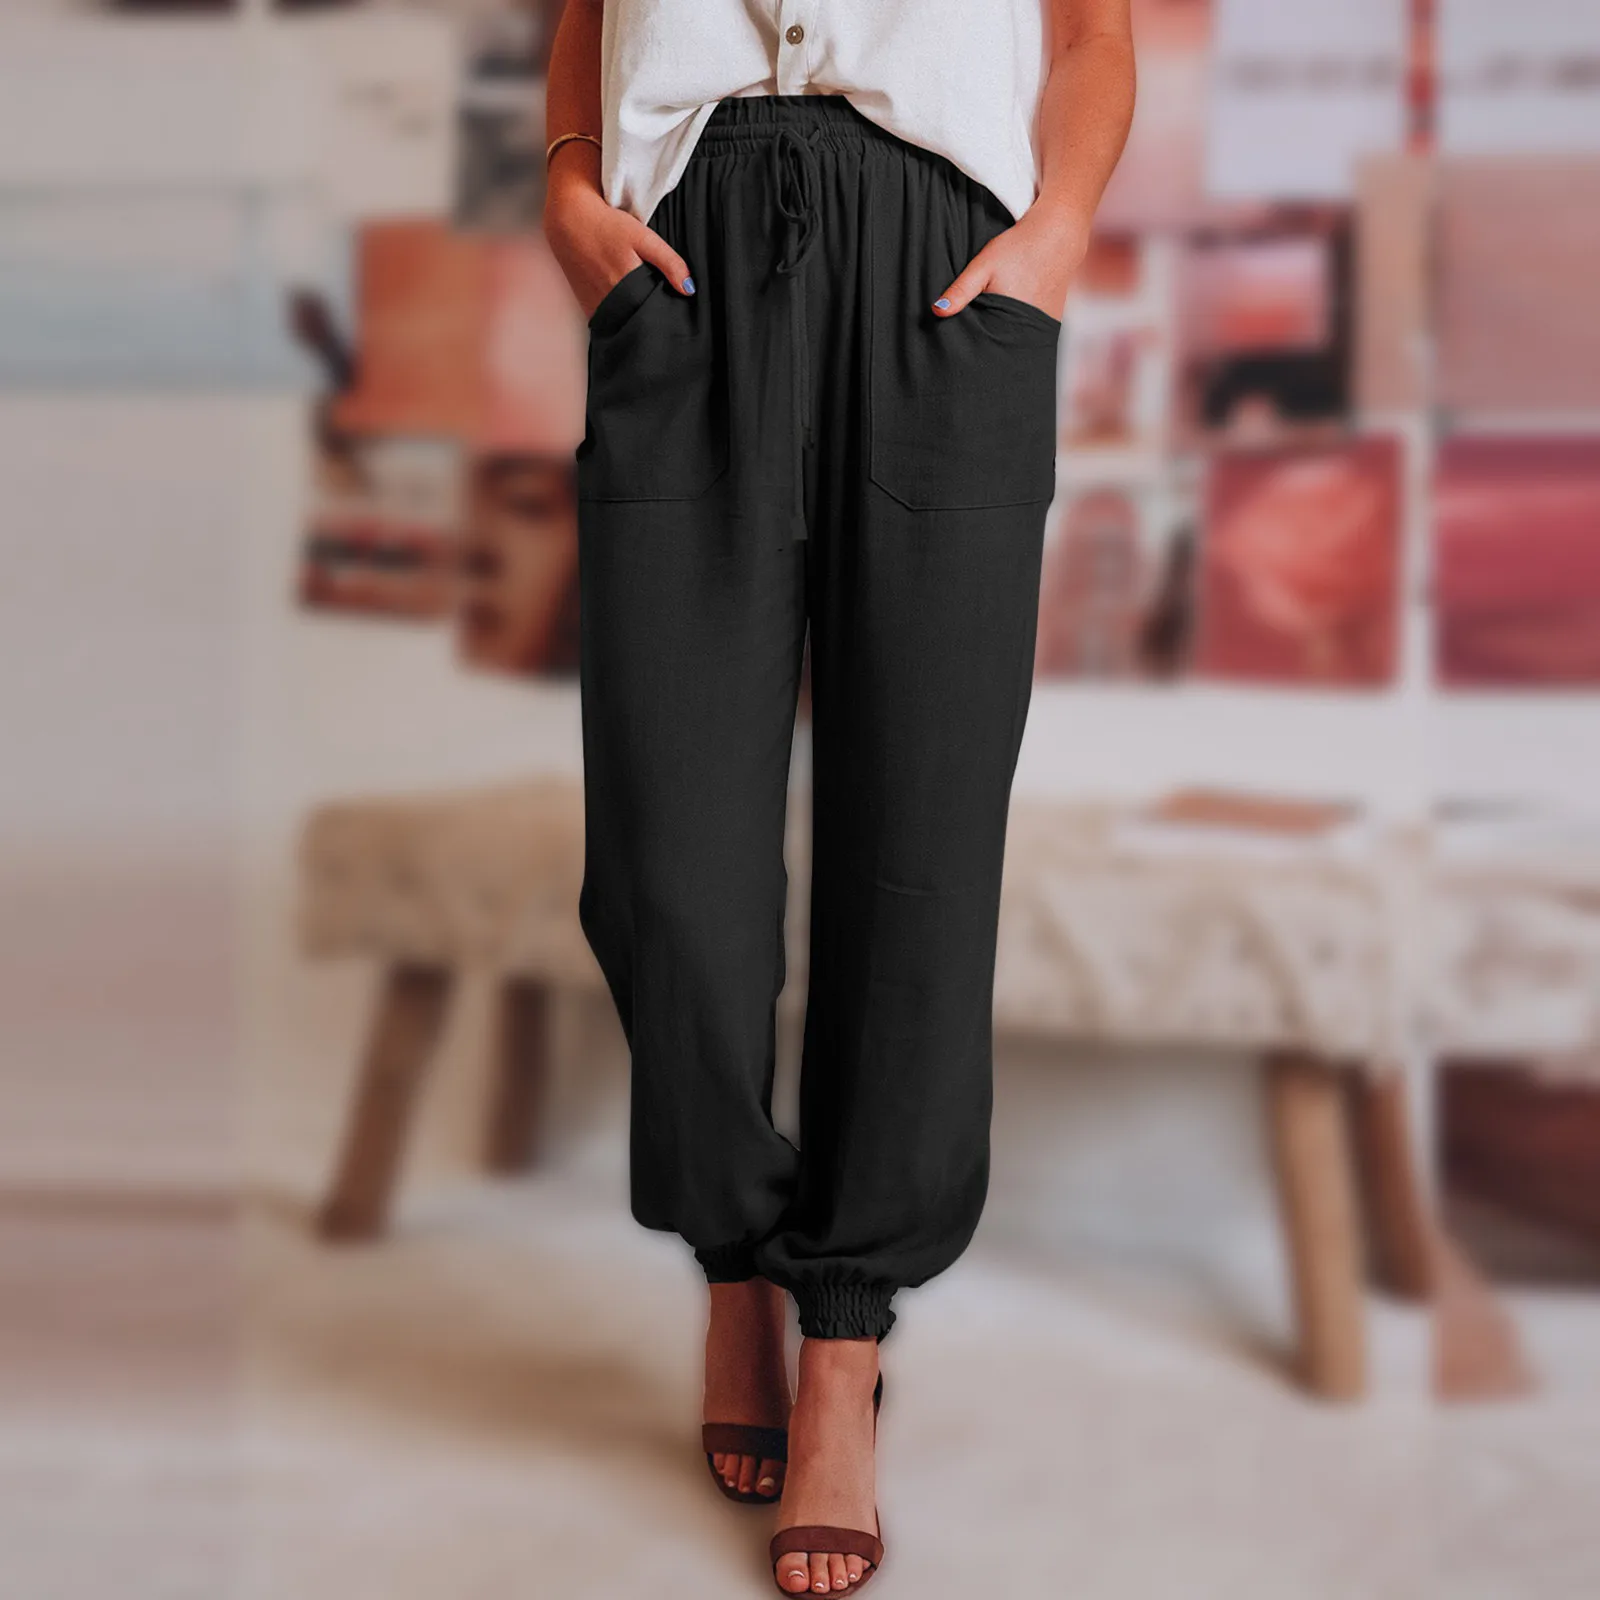 Women'S Lace-Up Pants Cotton And Linen Stitching Trousers Solid Color Pocket Ladies Casual Drawstring Pencil Long Pants